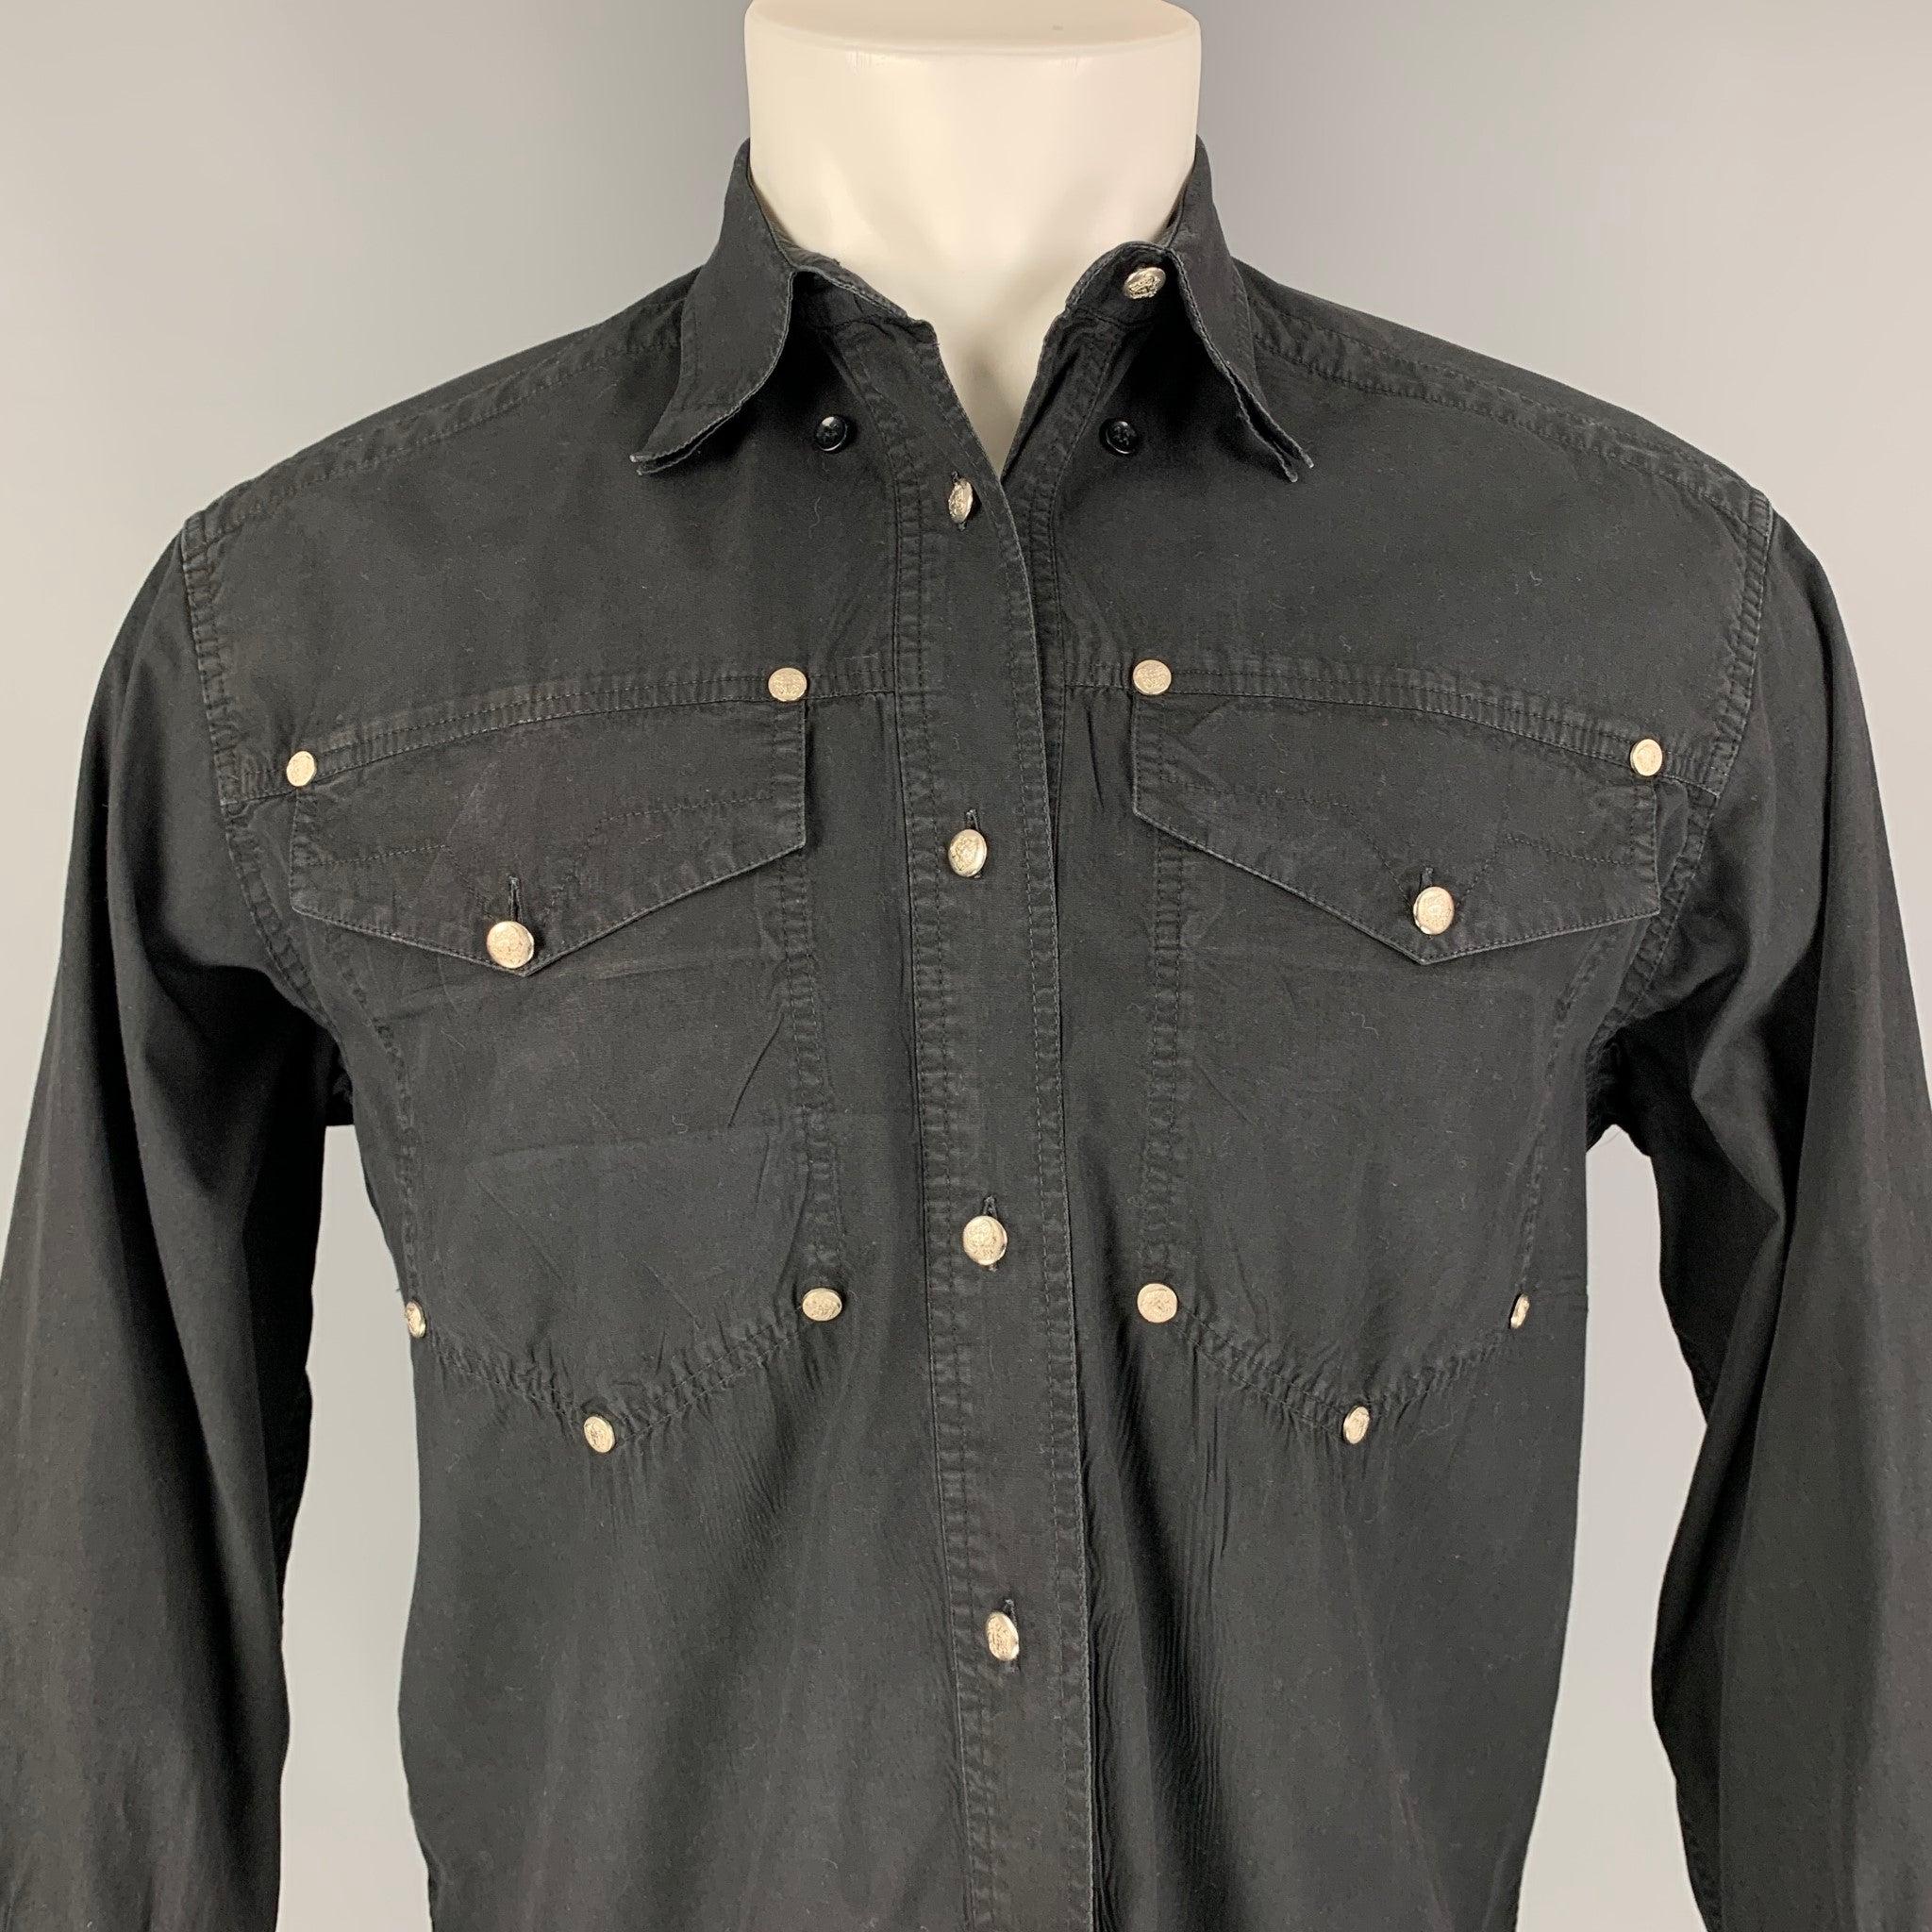 Vintage VERSACE JEANS COUTURE long sleeve shirt comes in a black cotton featuring a button down collar, front pockets, and a silver tone medusa logo buttoned closure.
Good
Pre-Owned Condition. 

Marked:   Size tag removed.  

Measurements: 
